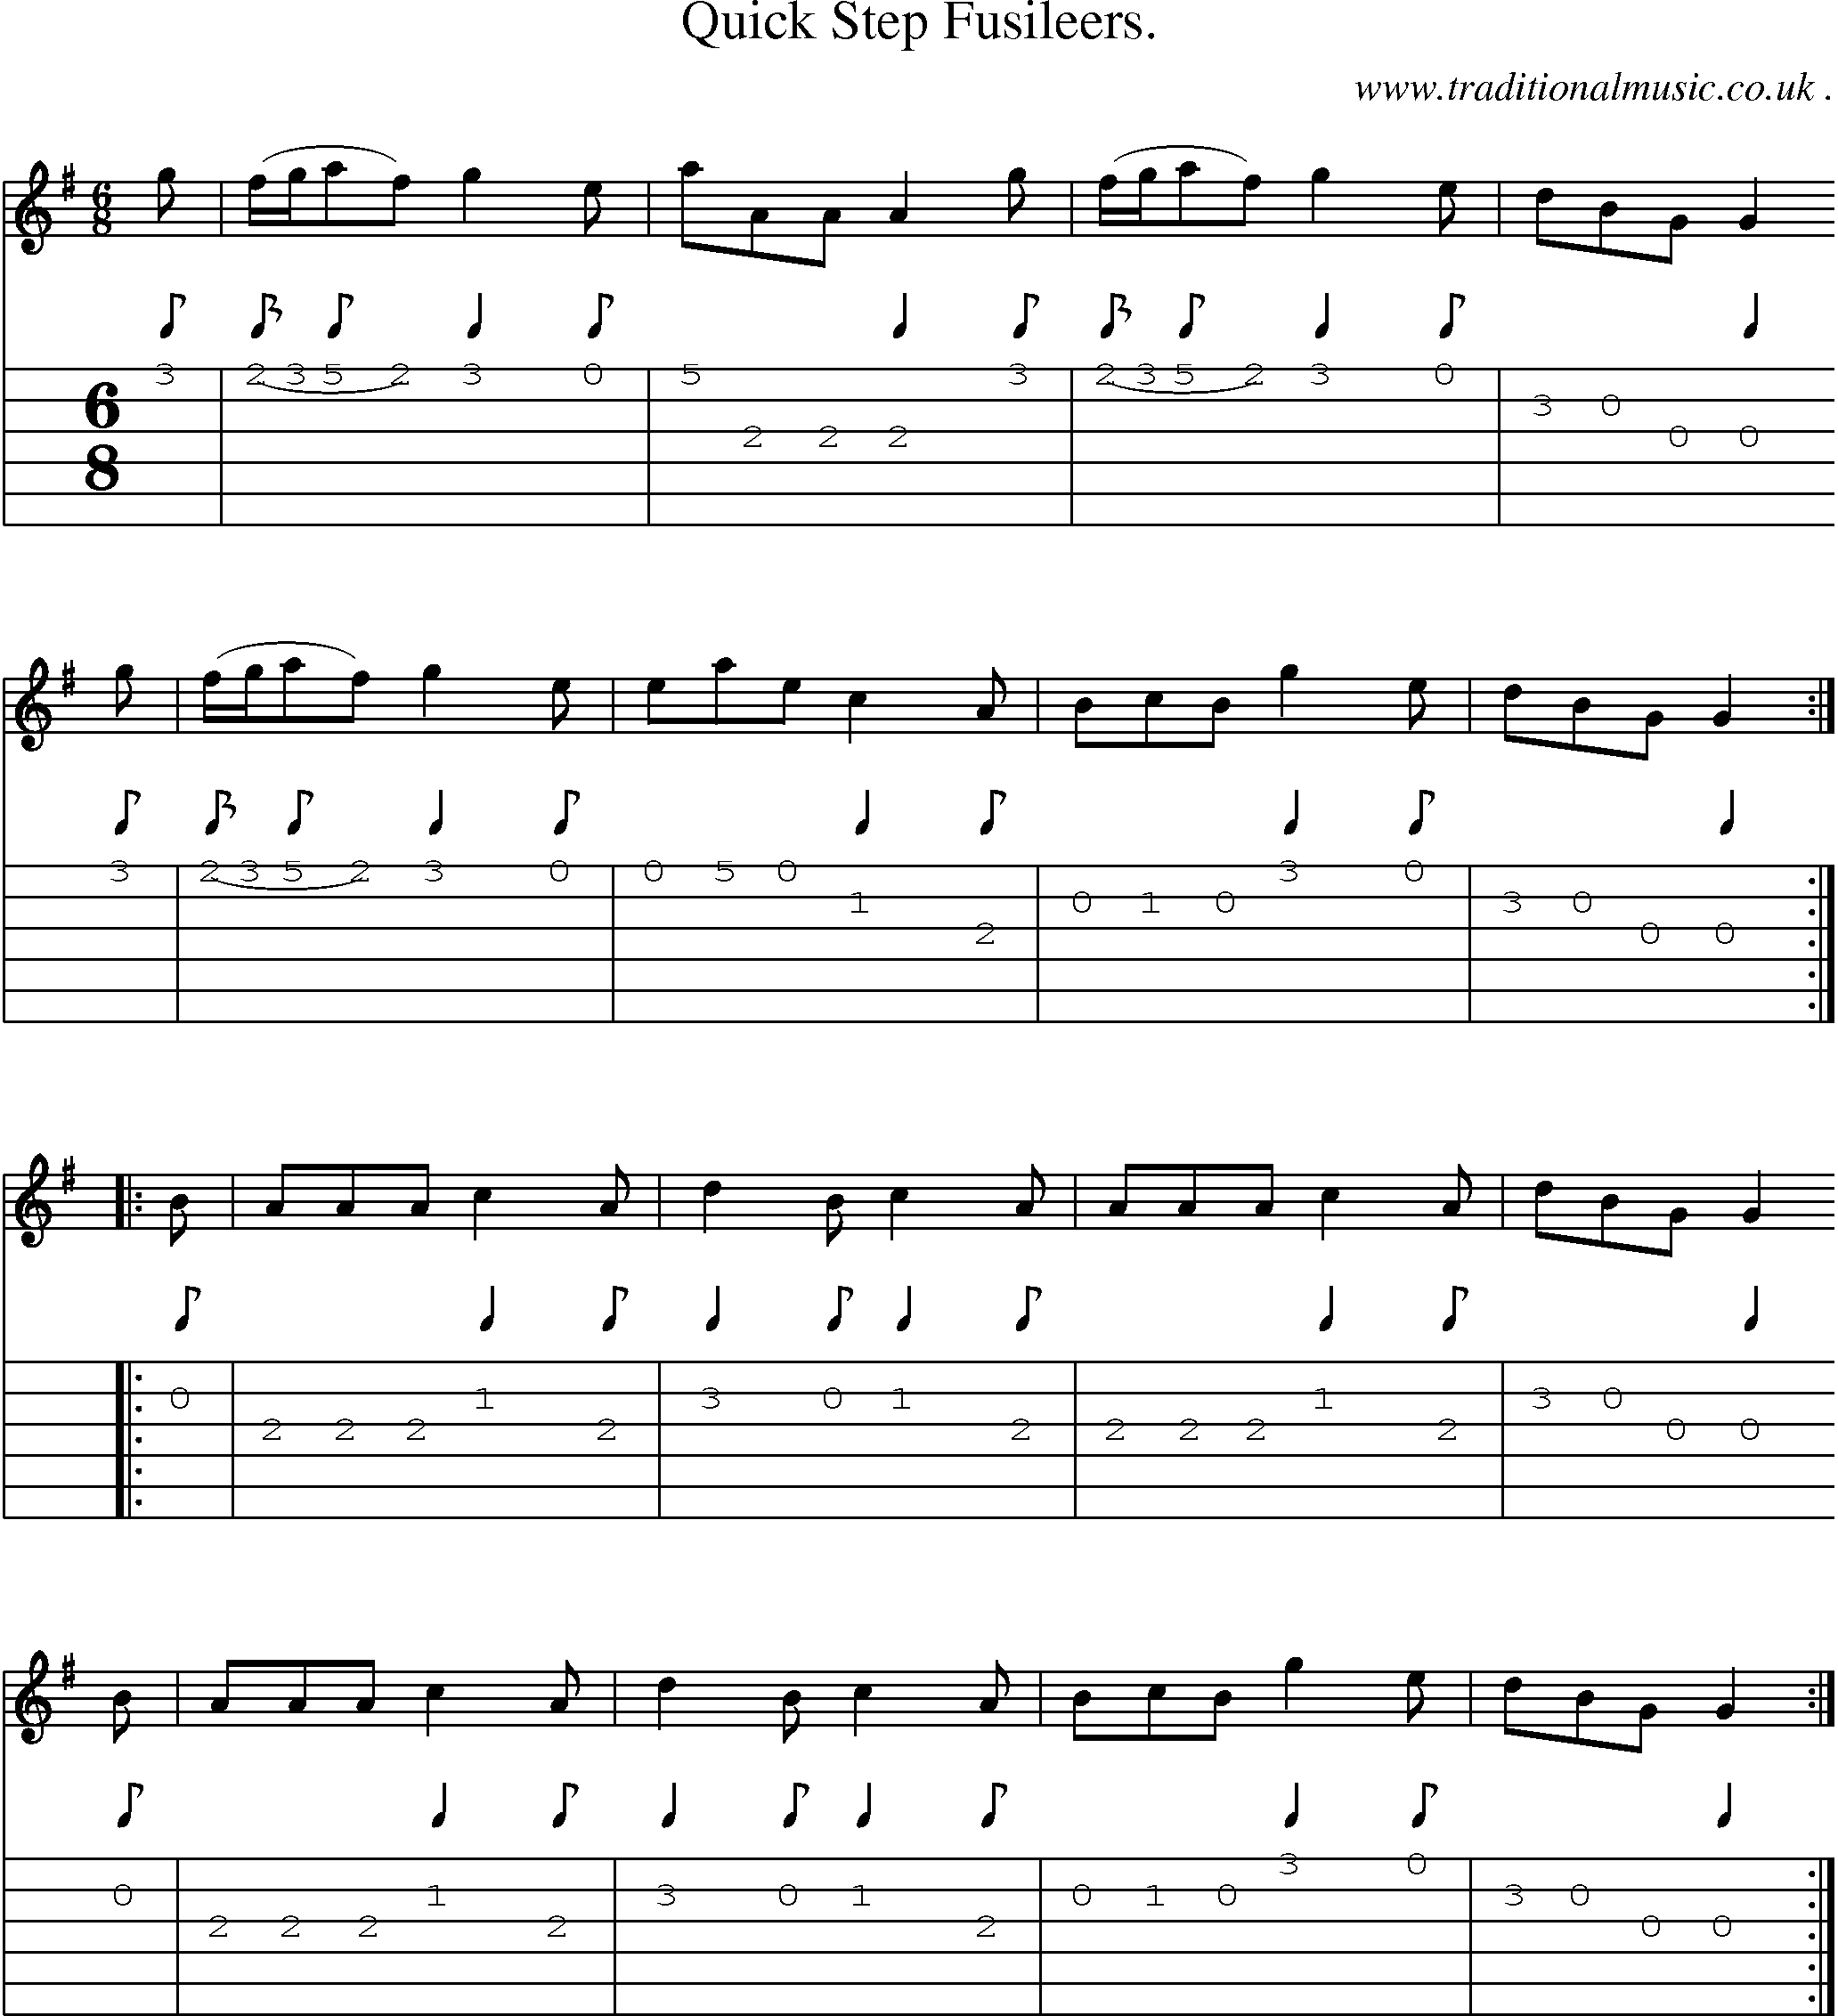 Sheet-music  score, Chords and Guitar Tabs for Quick Step Fusileers